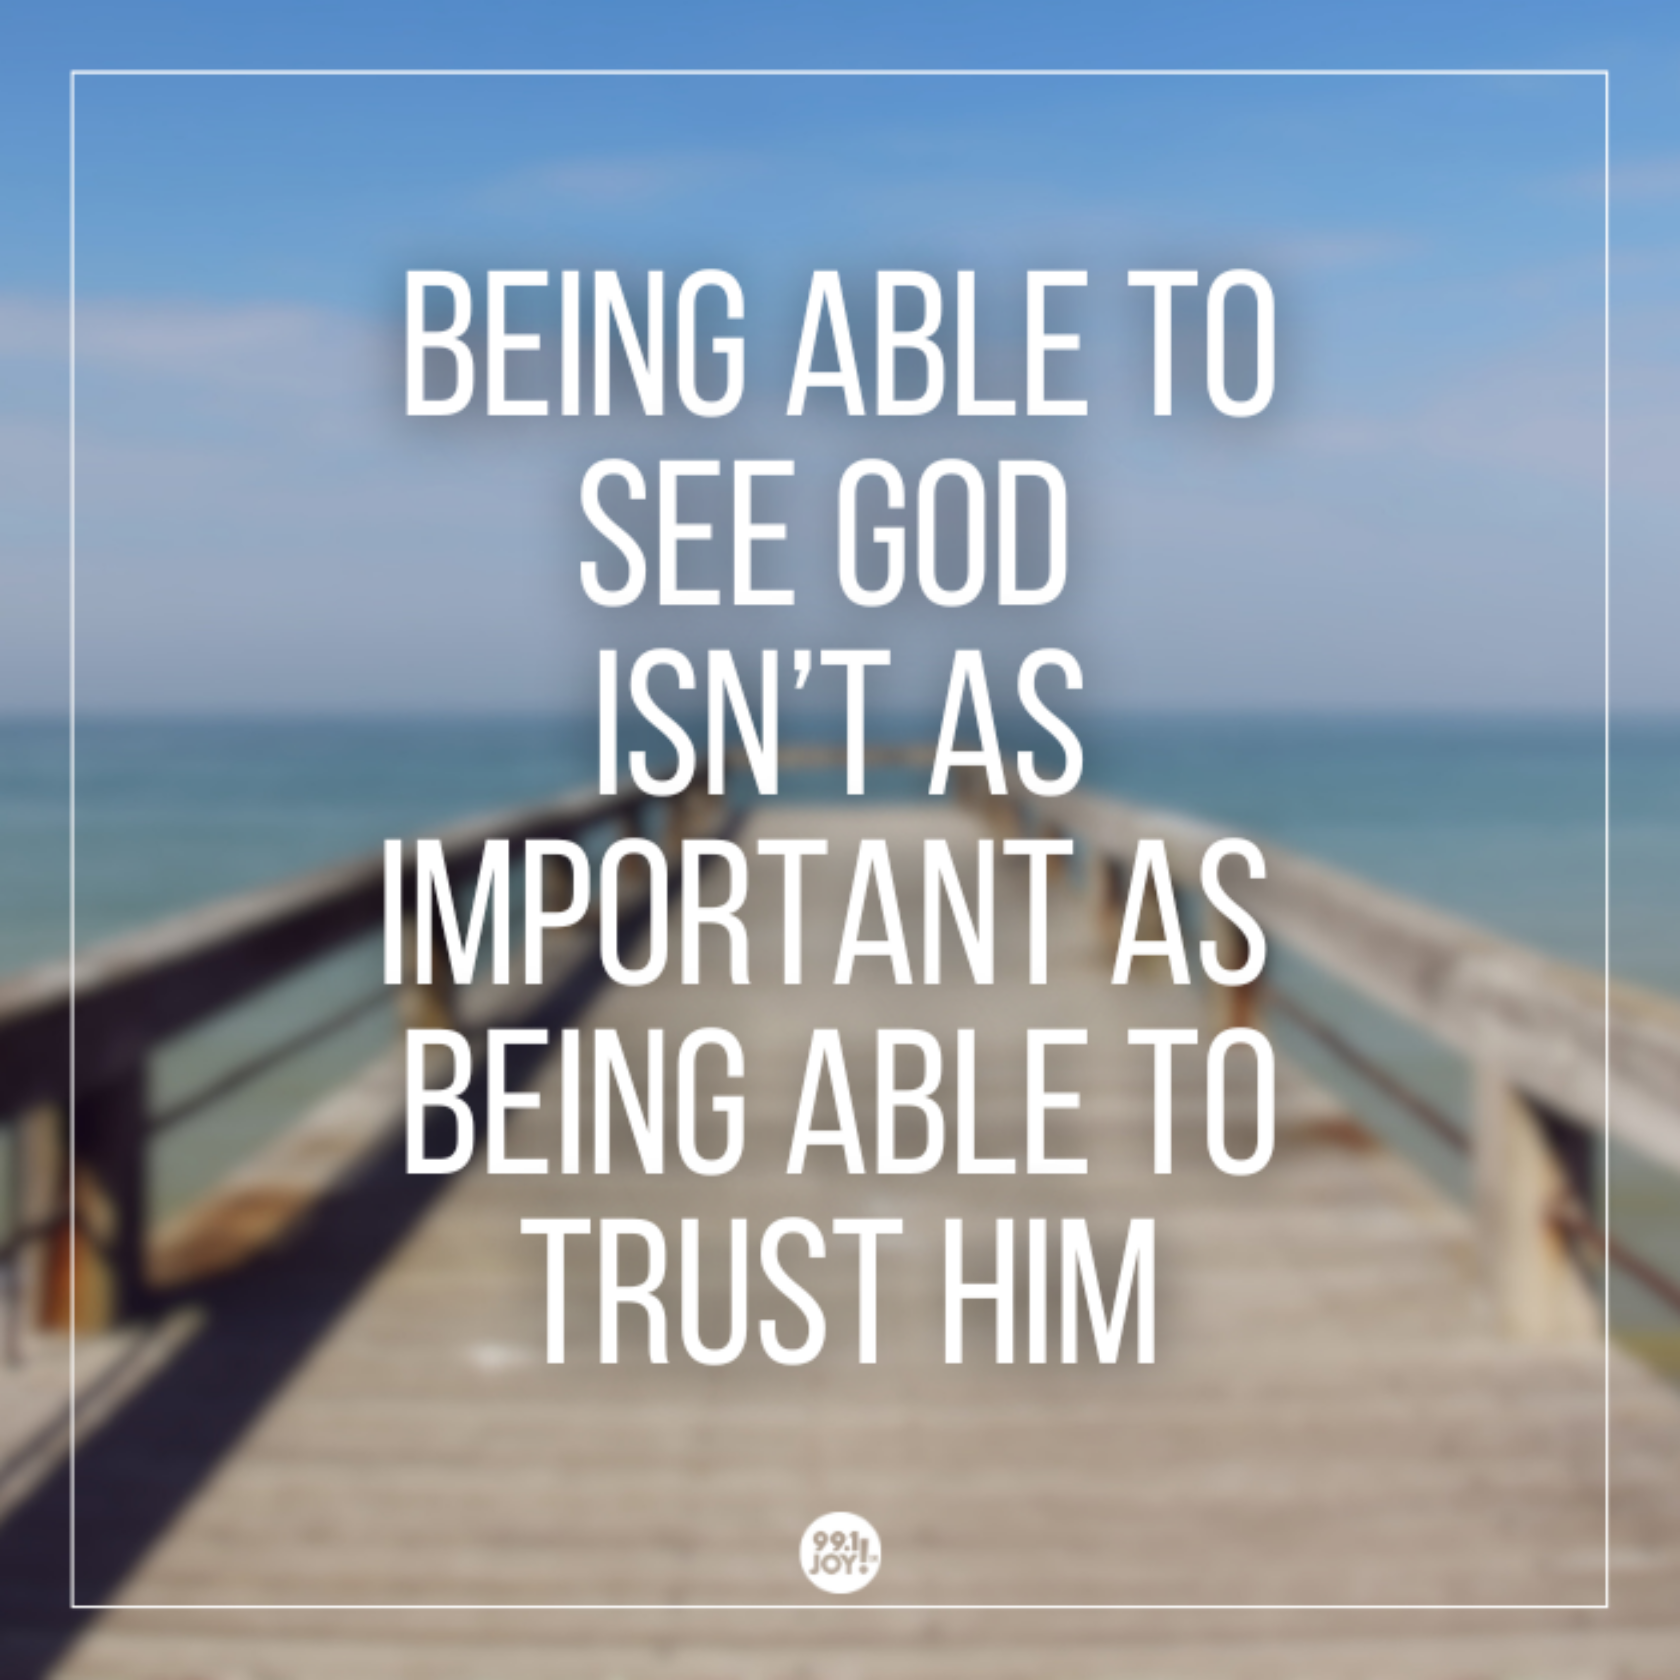 Being Able To See God Isn’t As Important As Being Able To Trust Him